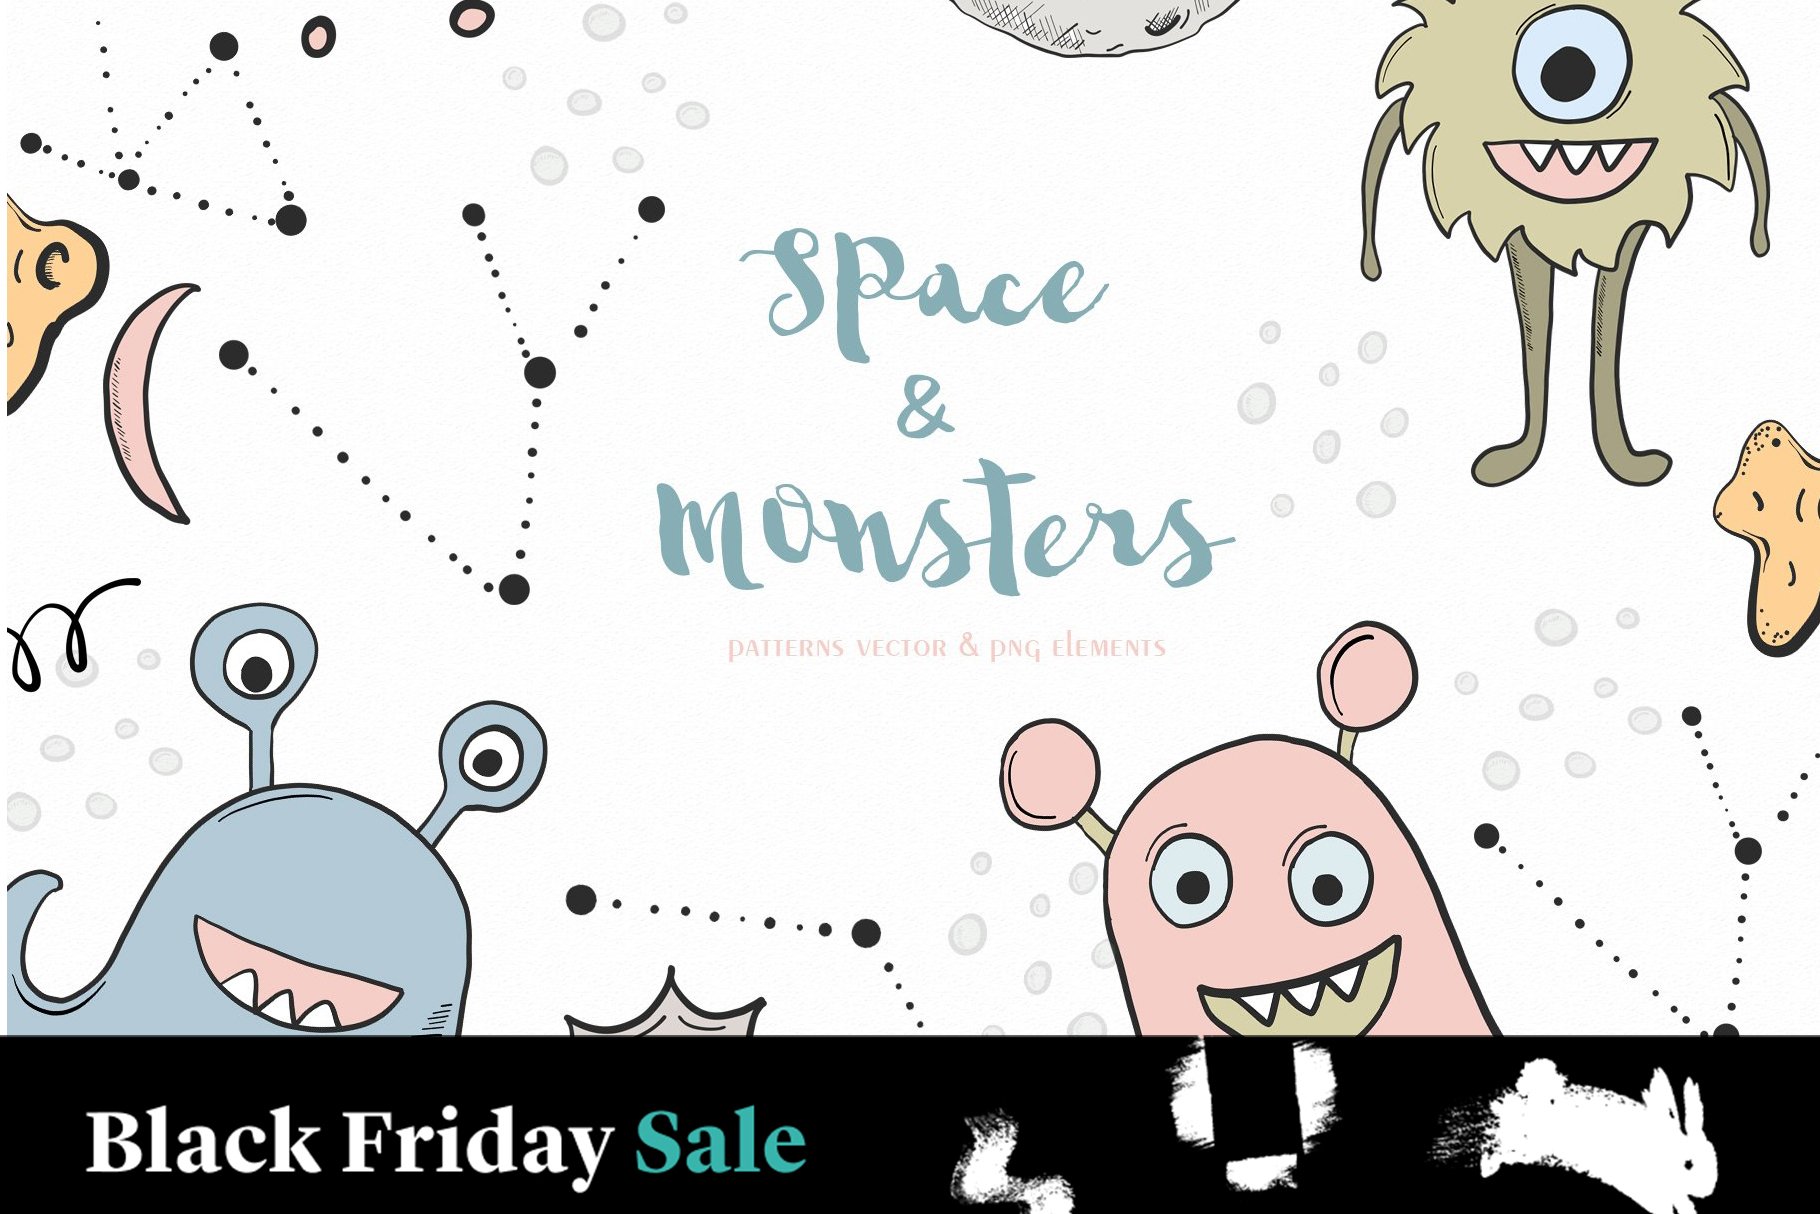 Spase & monsters clipart cover image.